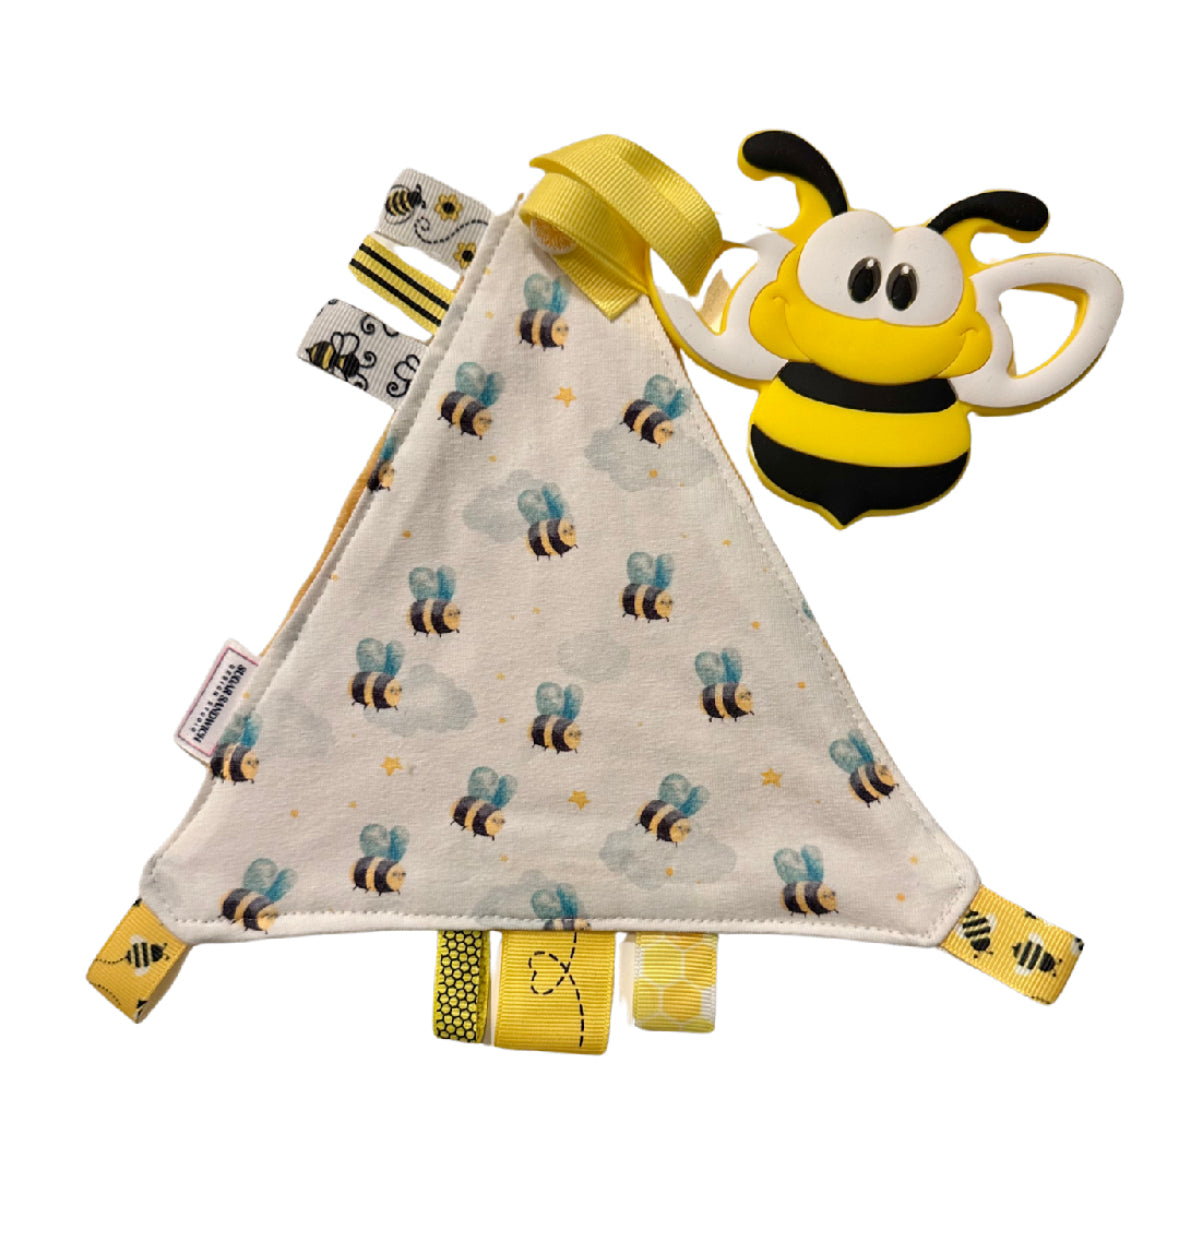 Bumblebee Triangle Shaped Crinkle Toy with Soother Clip Silicone Teether Food-safe Pendant